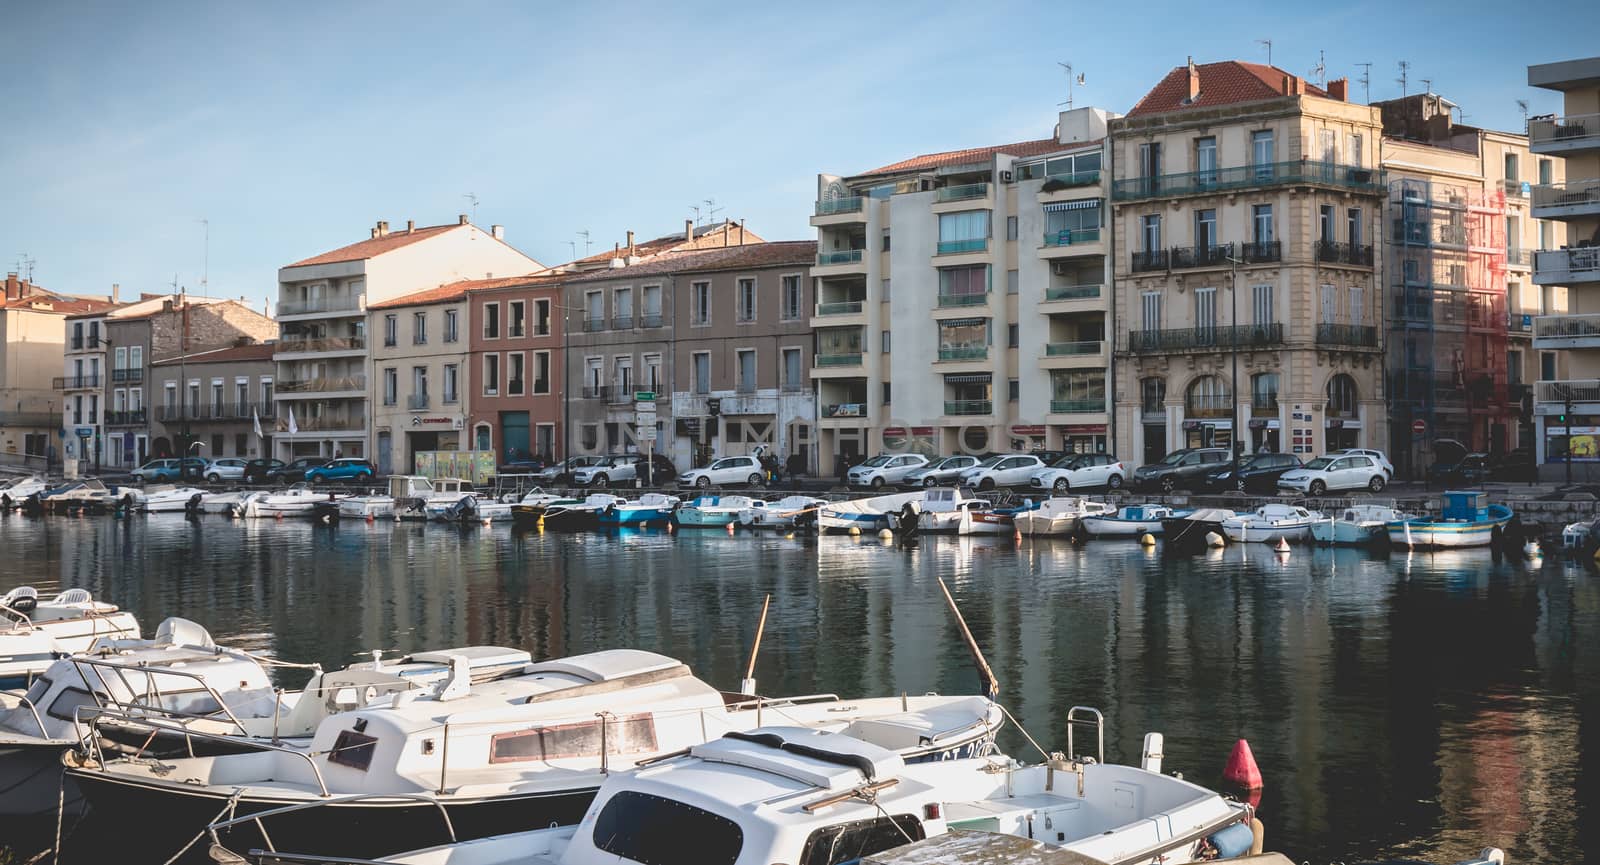 Sete, France - January 4, 2019: view of the marina in the city center where pleasure boats are parked on a winter day